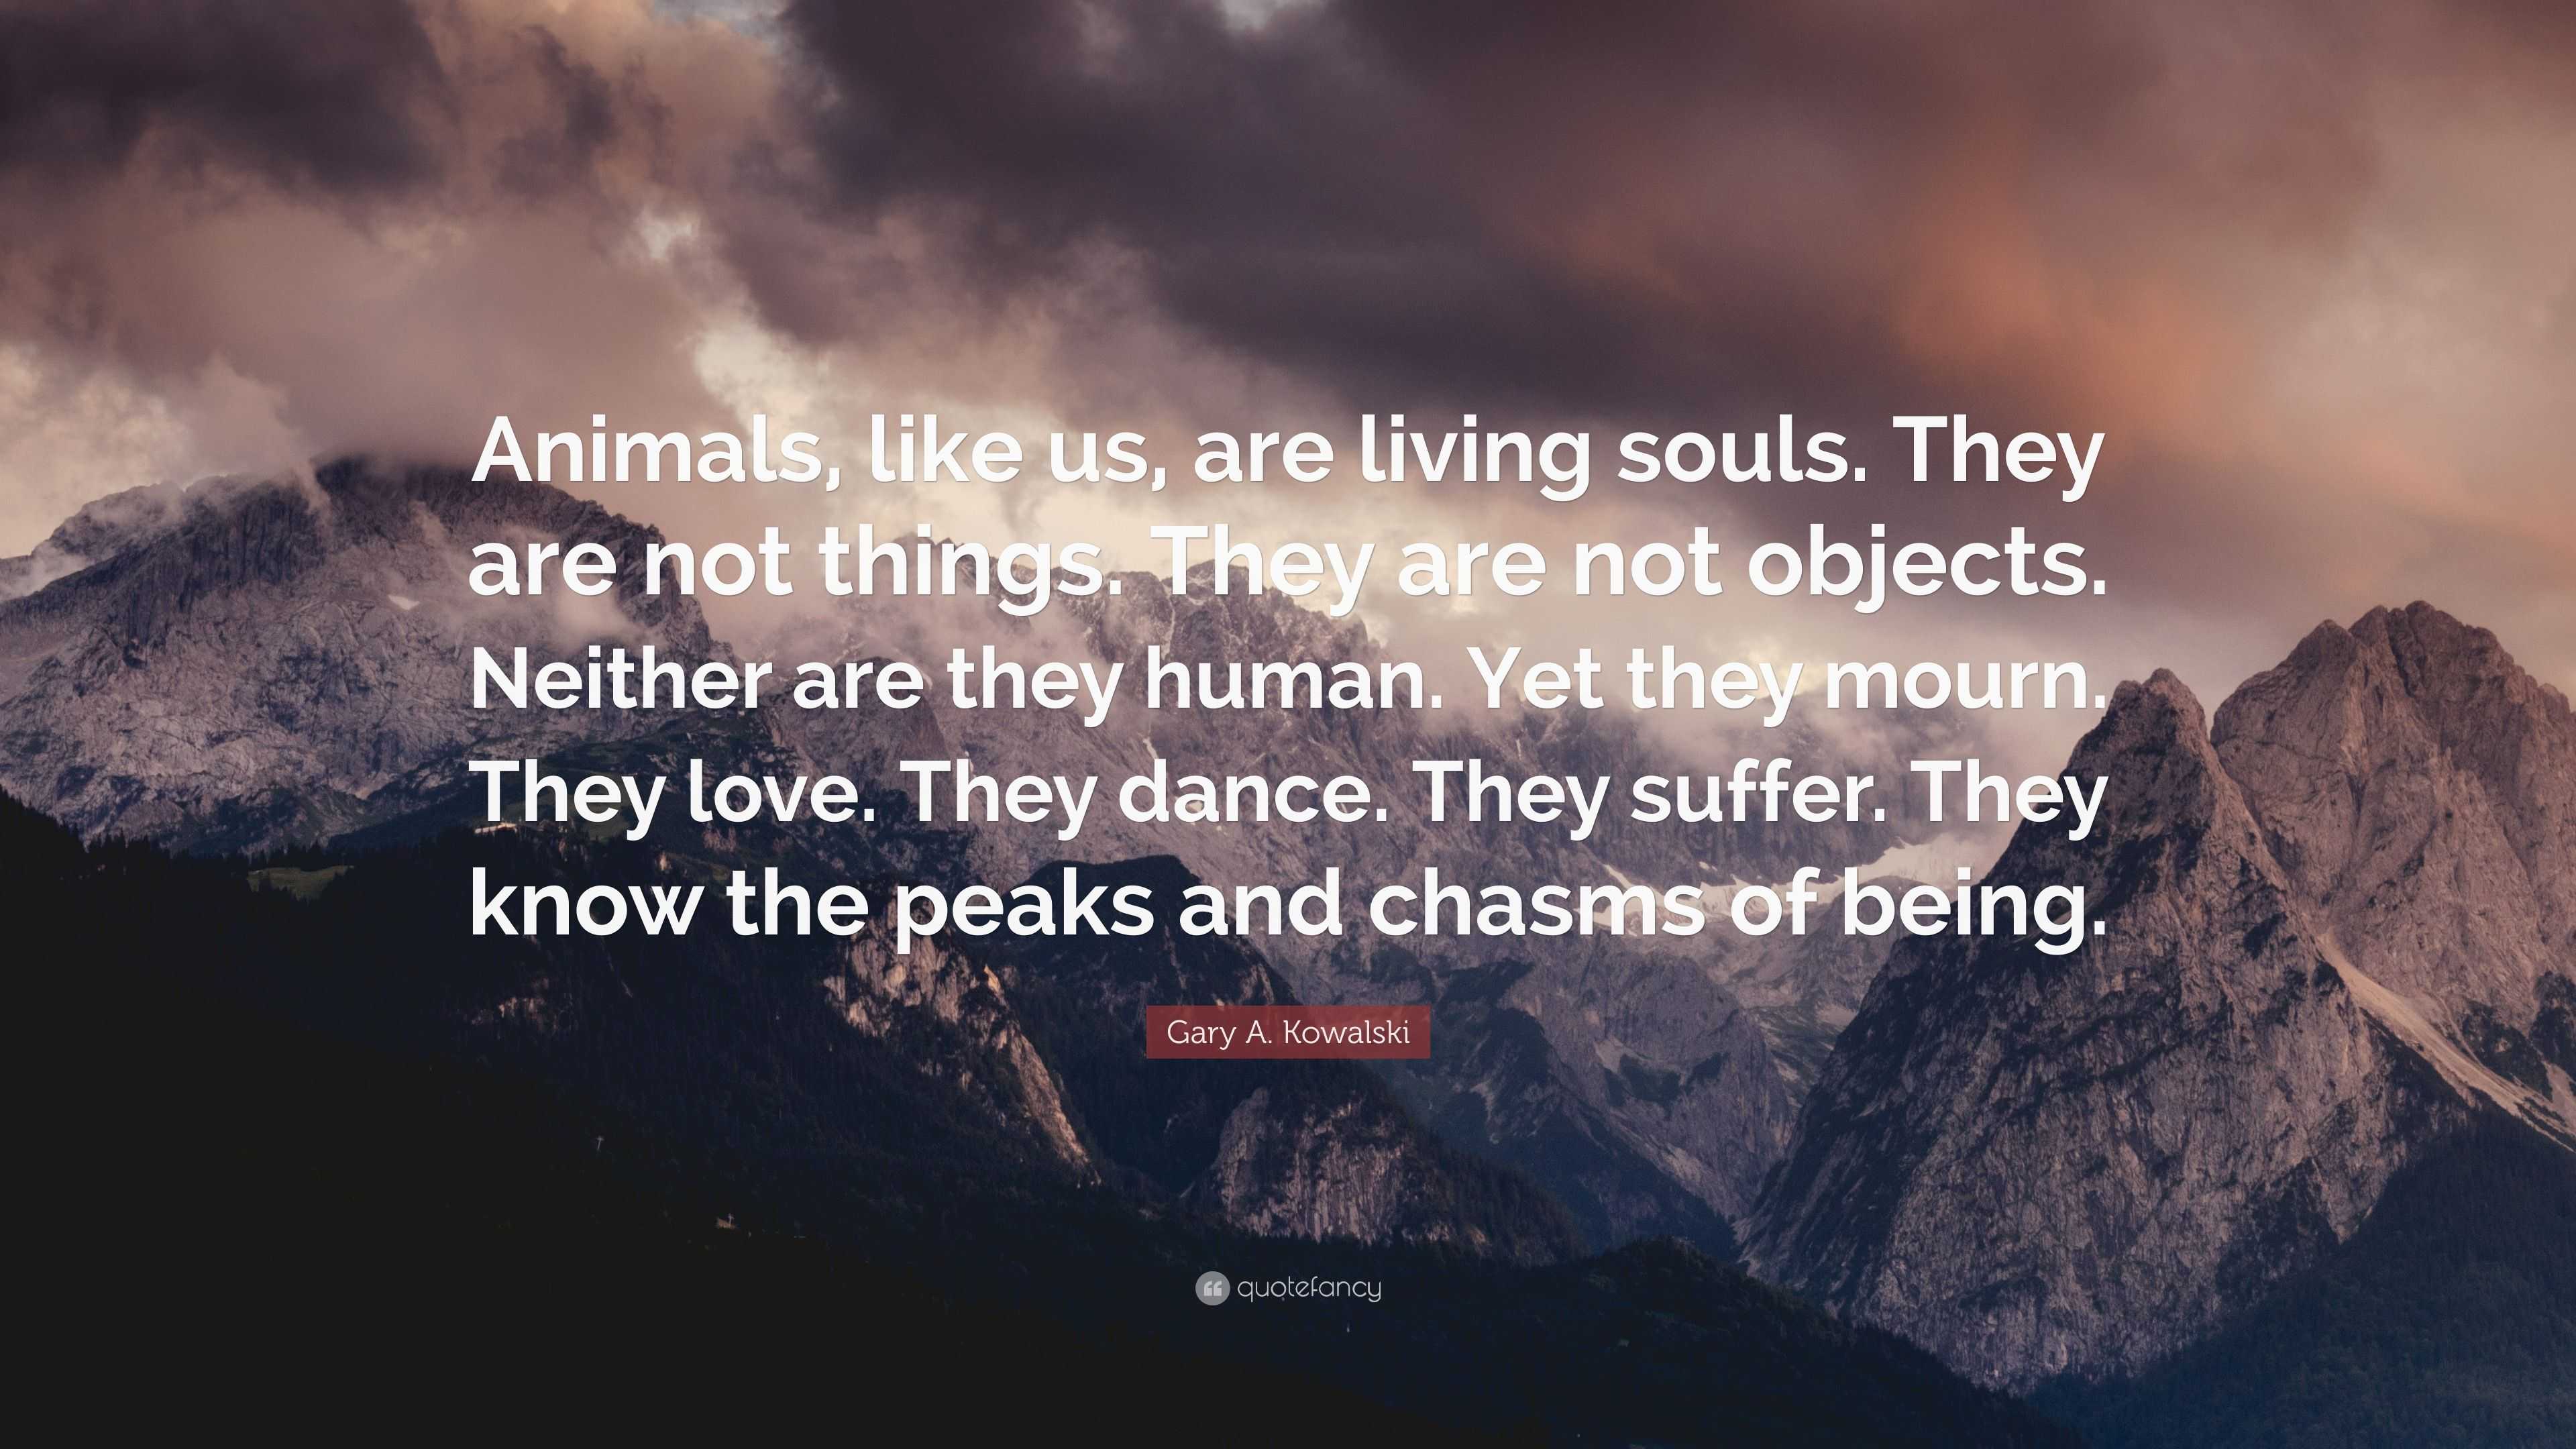 Gary A. Kowalski Quote: “Animals, like us, are living souls. They are not  things. They are not objects. Neither are they human. Yet they mourn. T...”